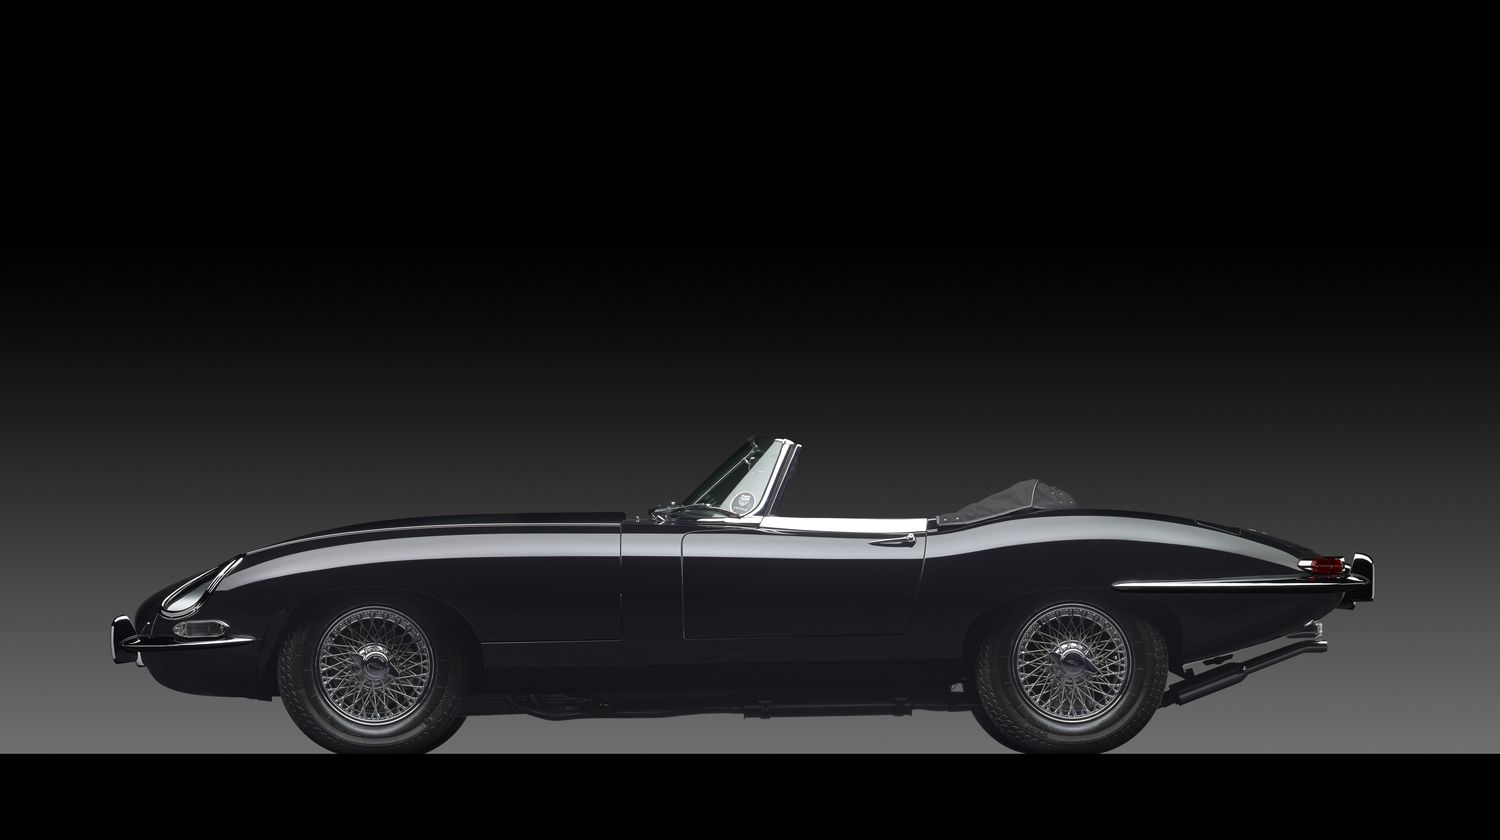 Free Download Jaguar E Type Wallpaper Image 46 1500x840 For Your